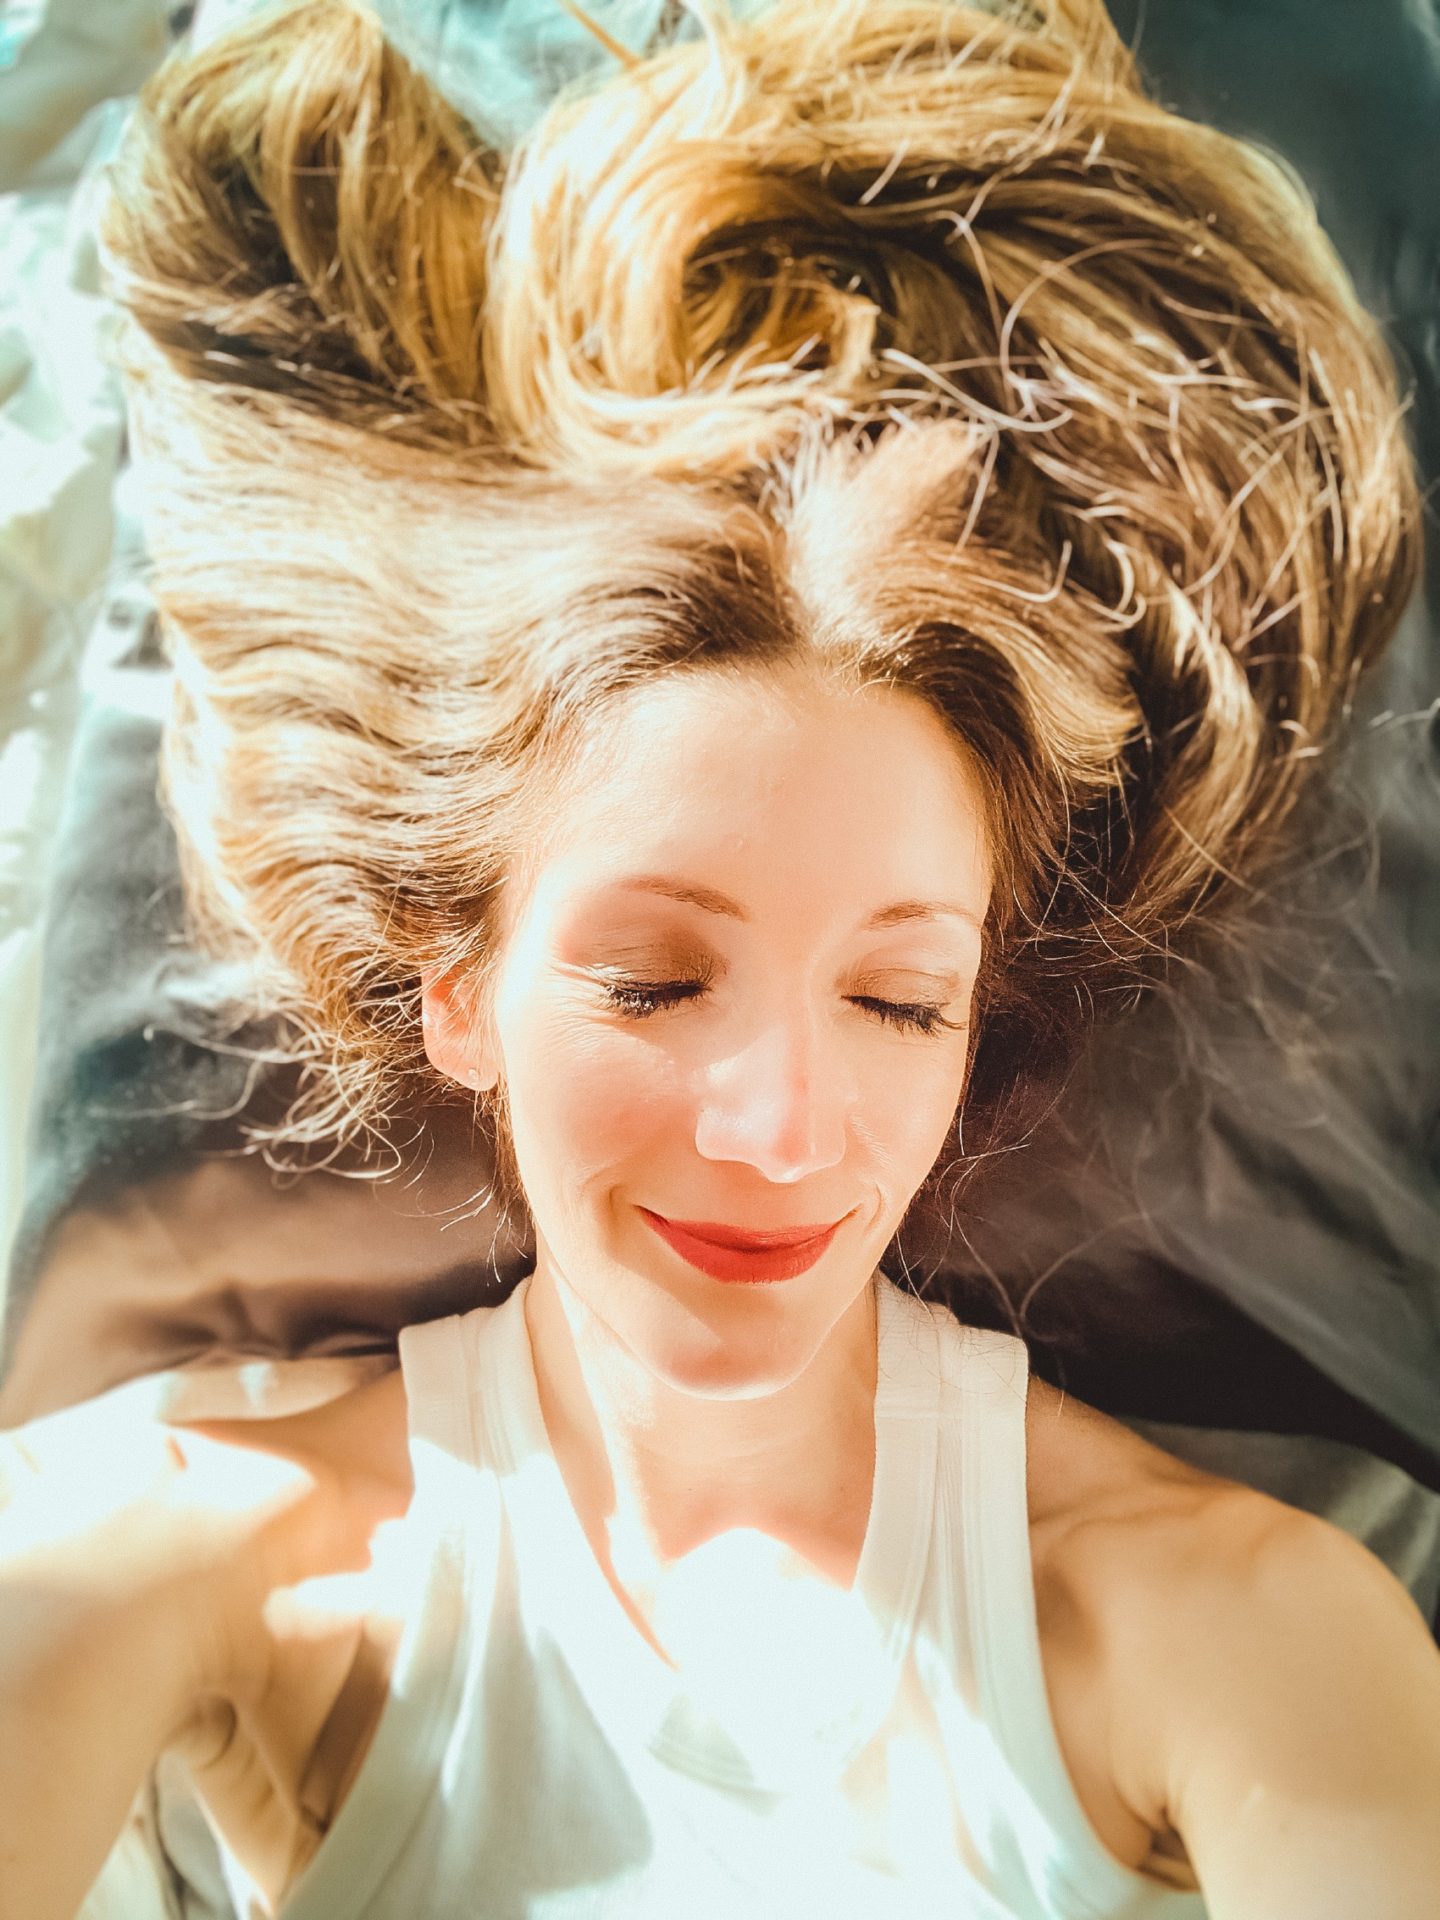 Beauty sleep is real! Here's 5 ways to get beauty sleep and make the most of your gorgeous self while you're sleeping. Tried and tested tips!